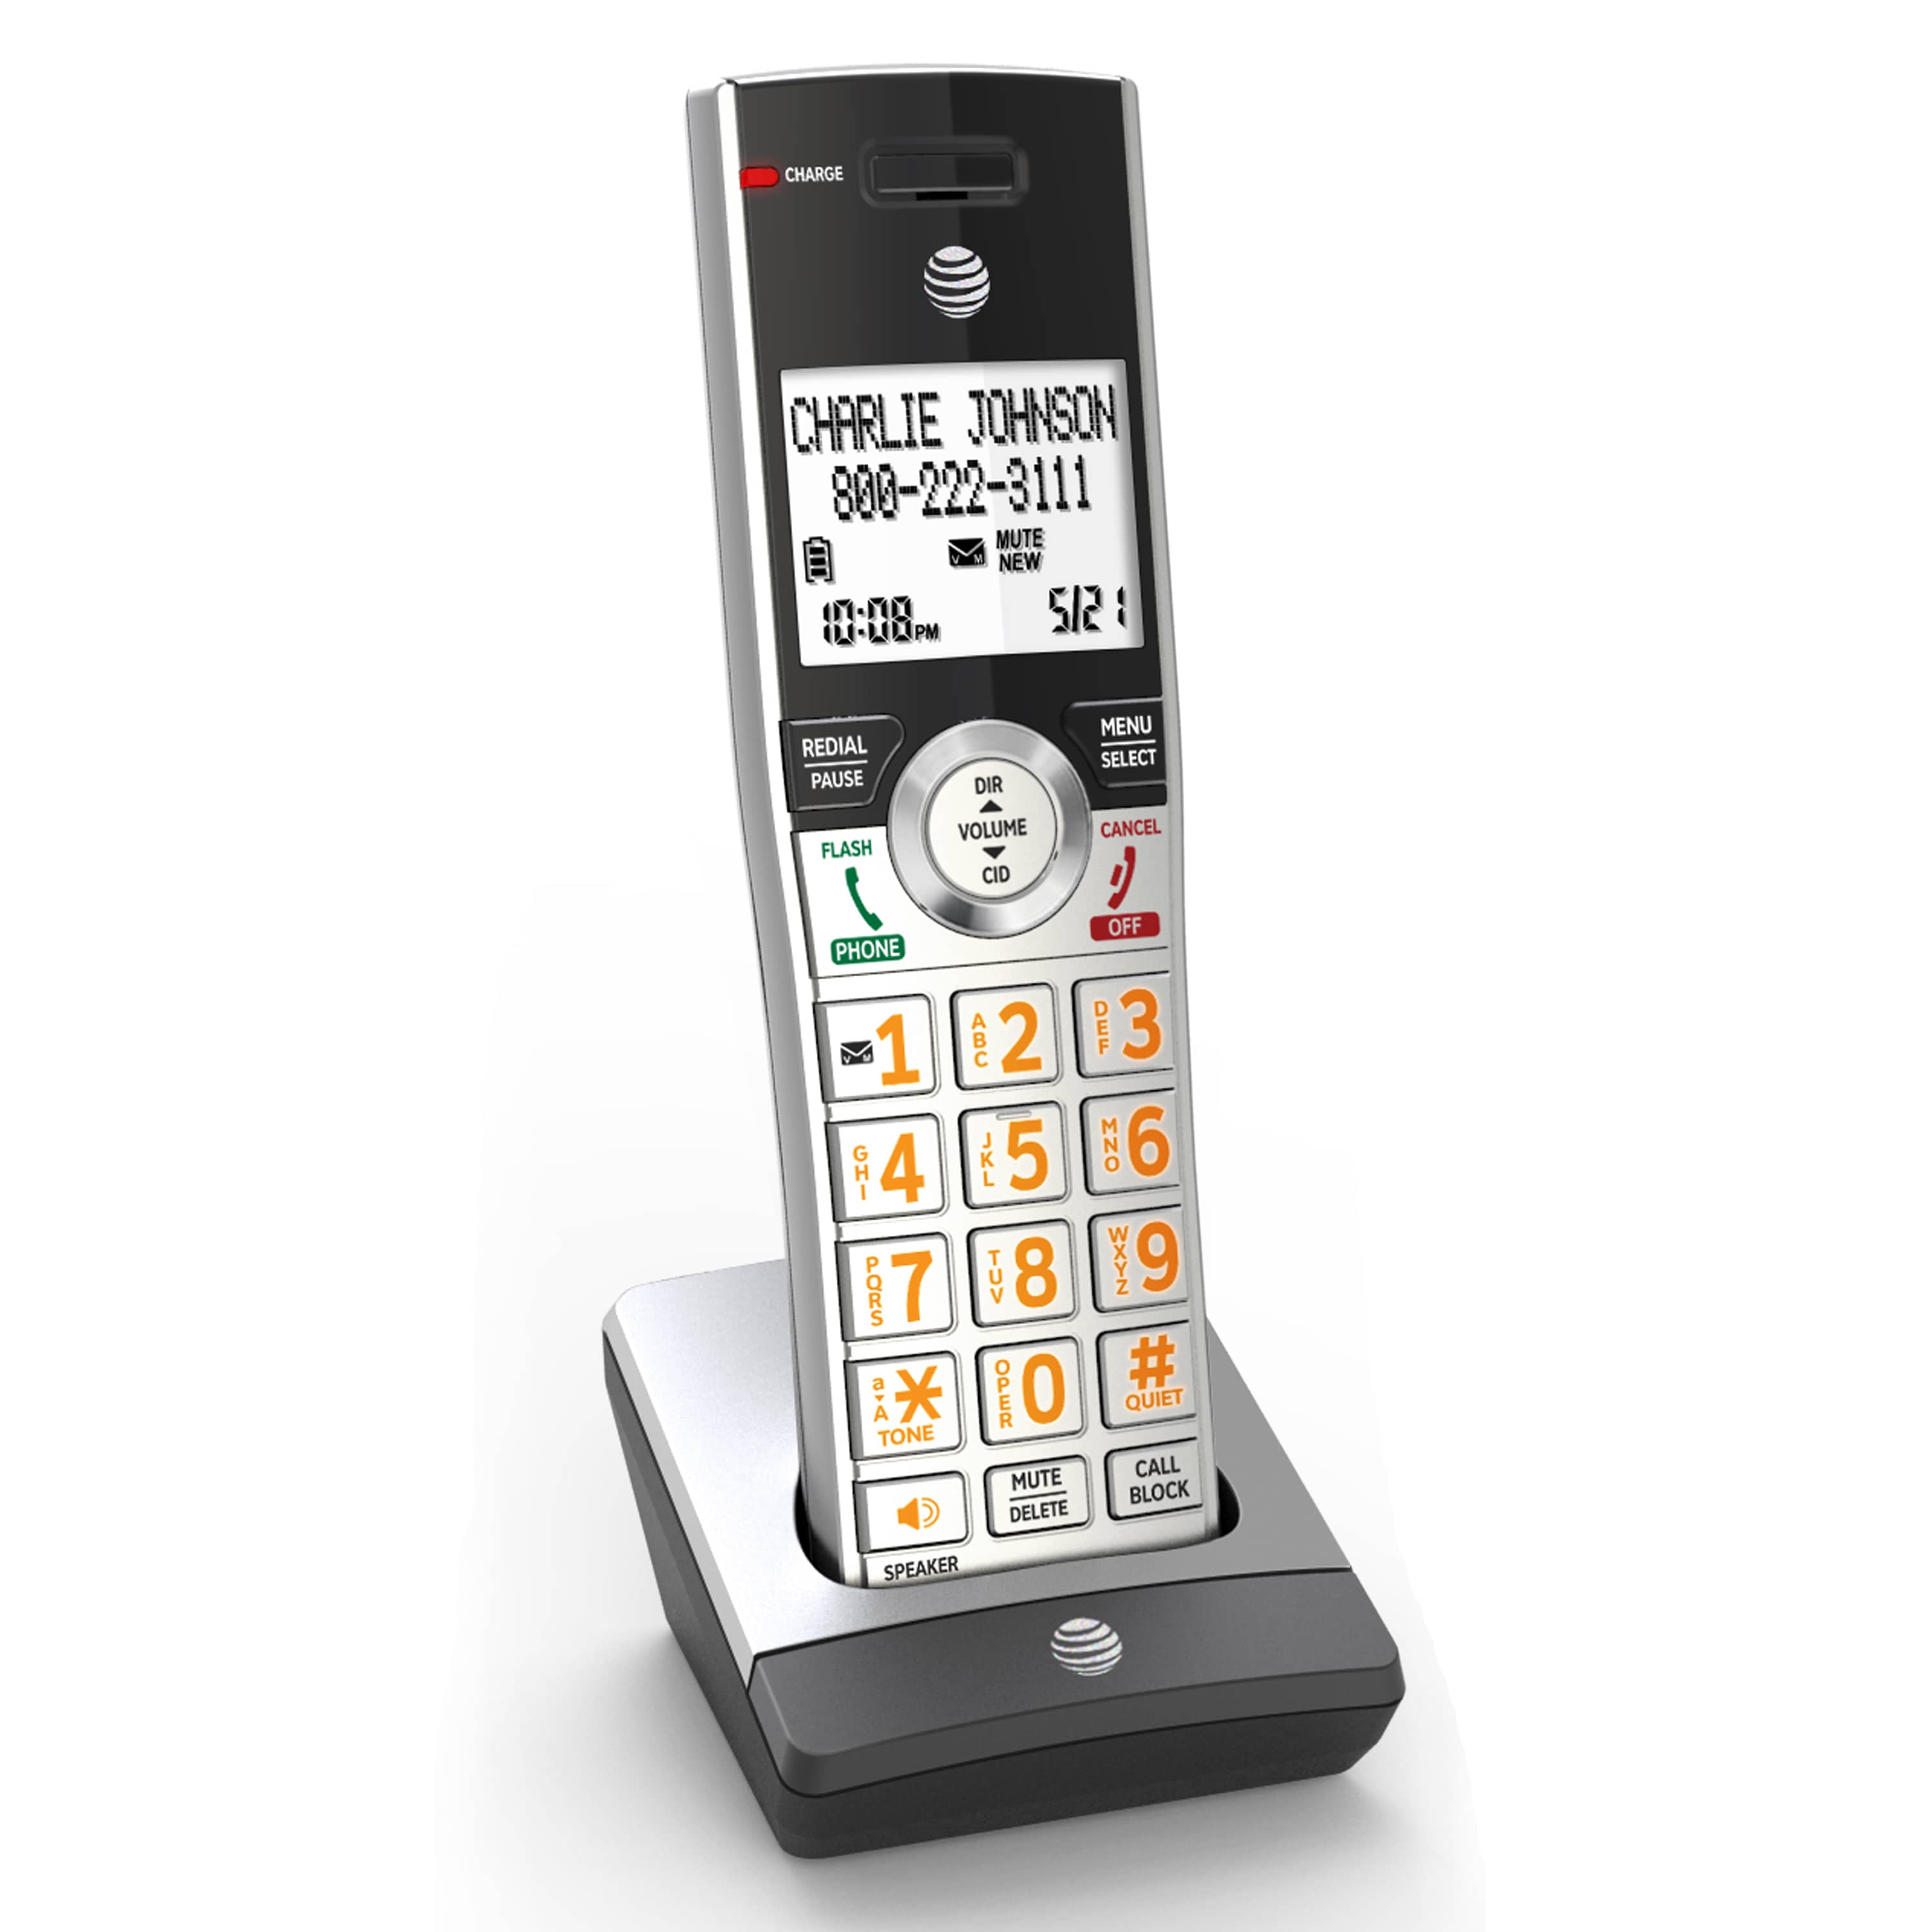 Cordless Accessory Handset for AT&T CL82207, CL82267, CL82307, CL82367, CL82407, CL83207, CL83407, CL84107, CL84207 and CL84327 - view 3